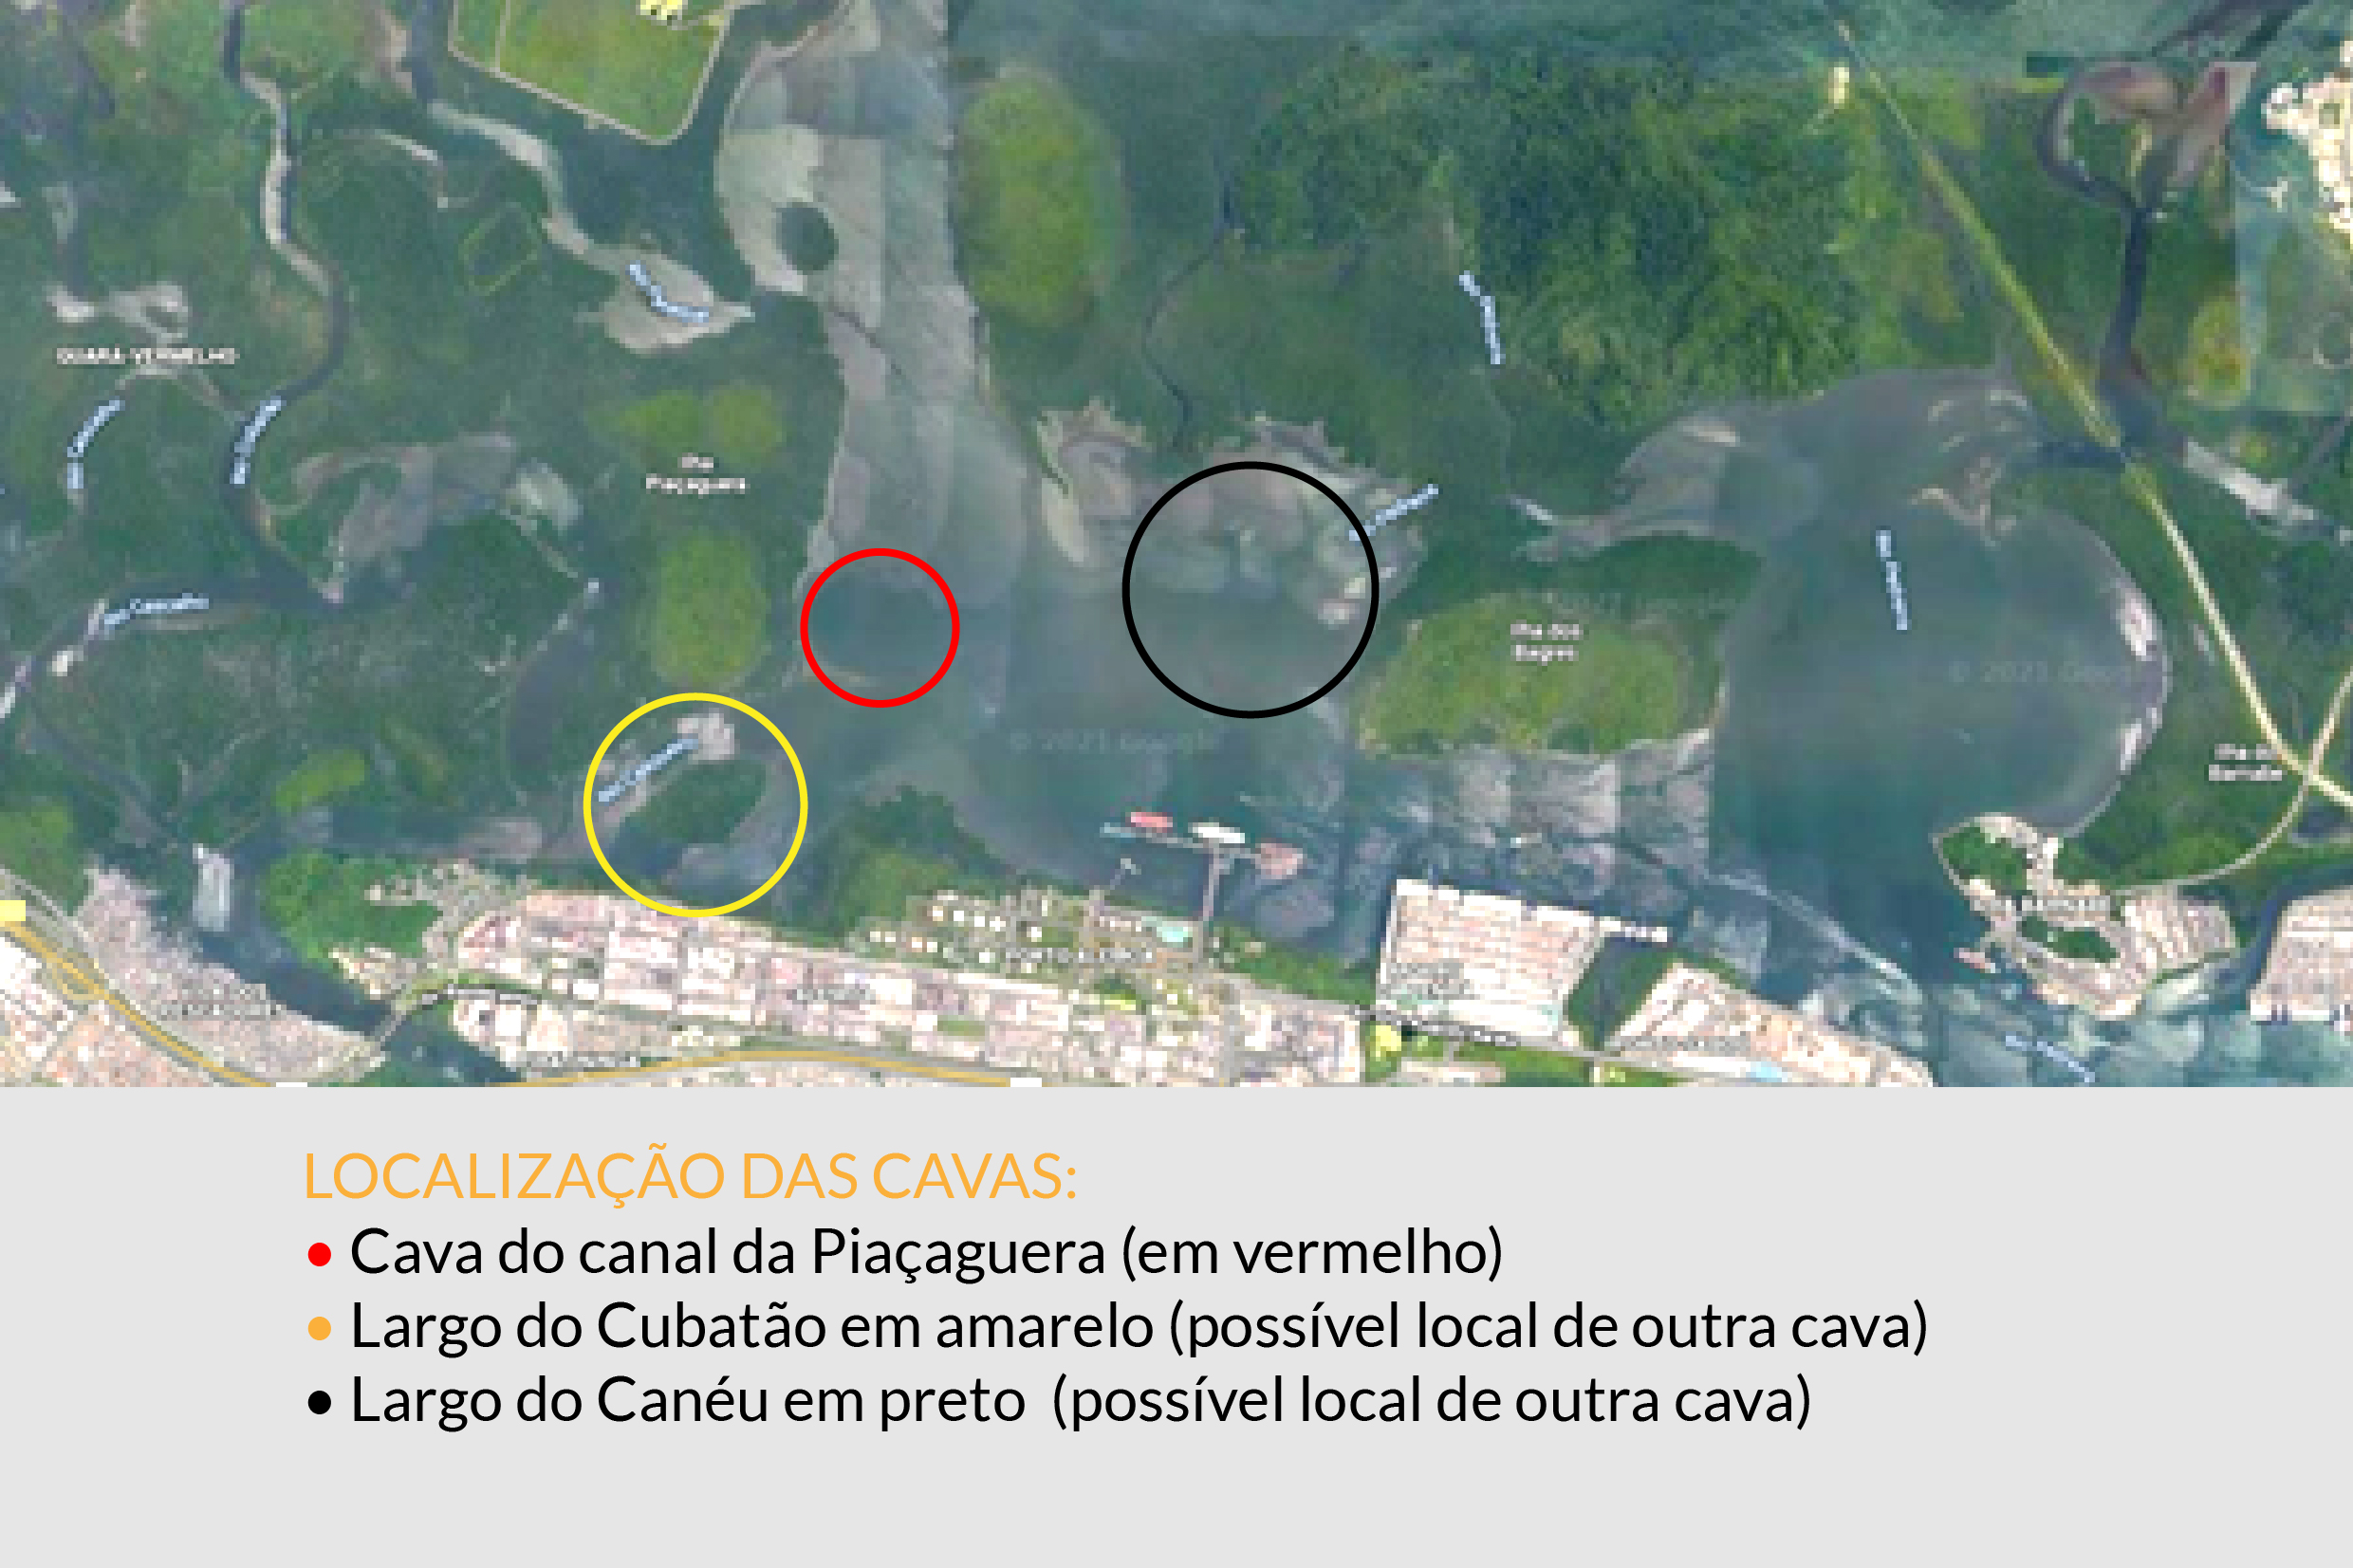 Infográfico <a style='float:right' href='https://www3.al.sp.gov.br/repositorio/noticia/N-11-2021/fg278698.jpg' target=_blank><img src='/_img/material-file-download-white.png' width='14px' alt='Clique para baixar a imagem'></a>